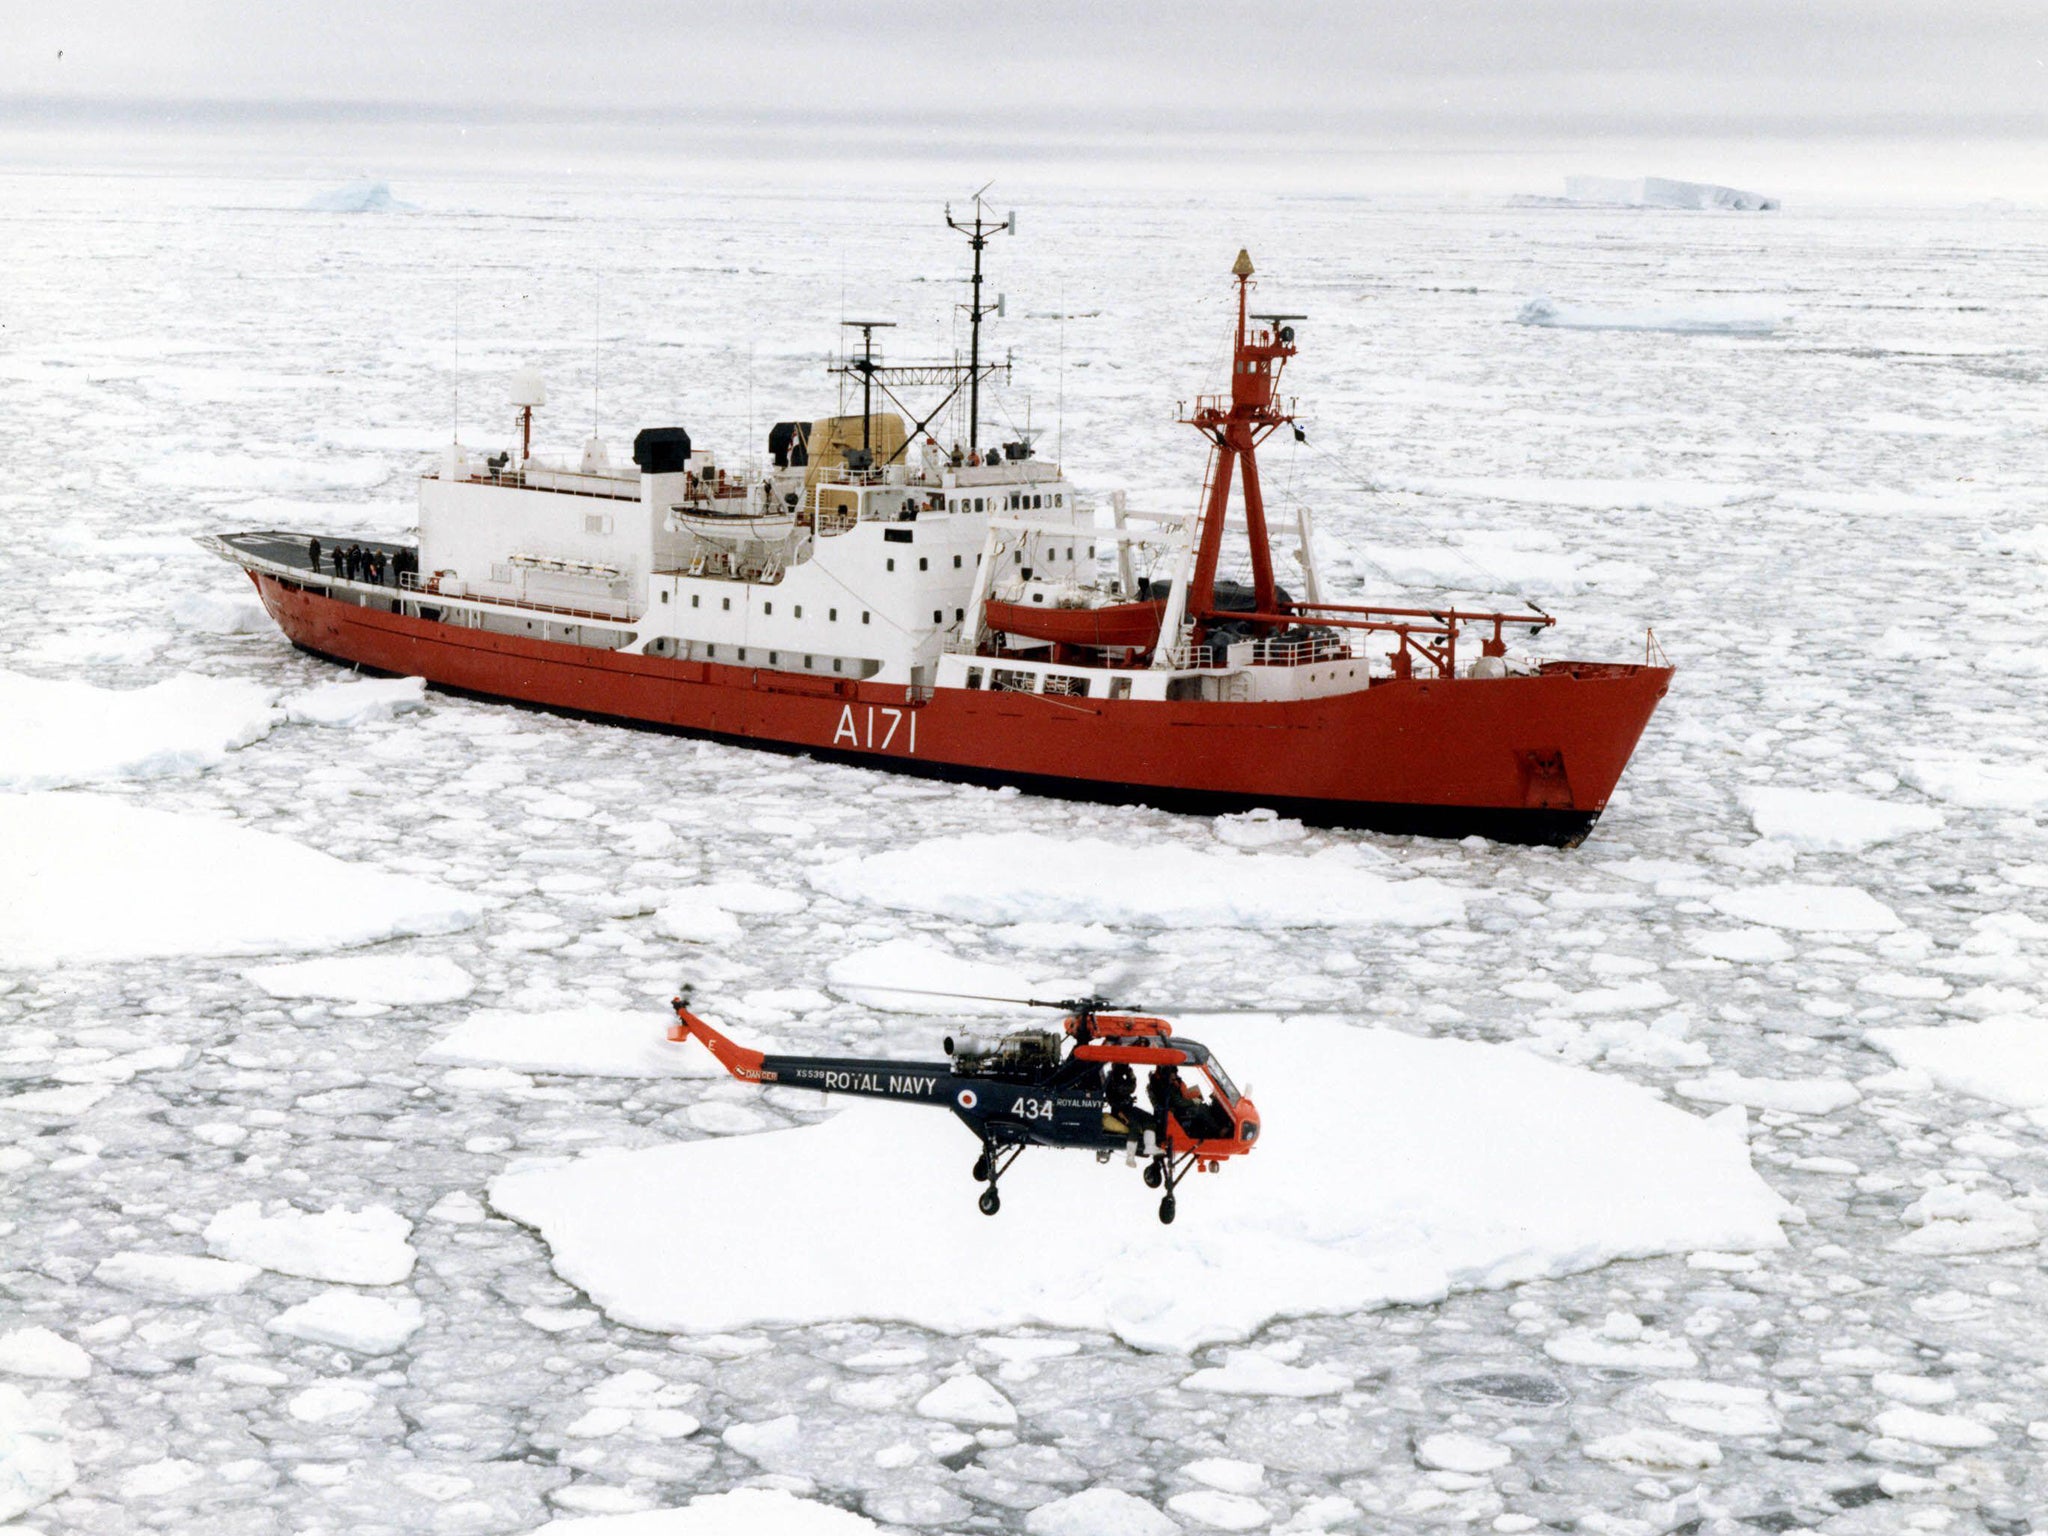 HMS Endurance in the Weddell Sea, in the East Antarctic Peninsula, 1984